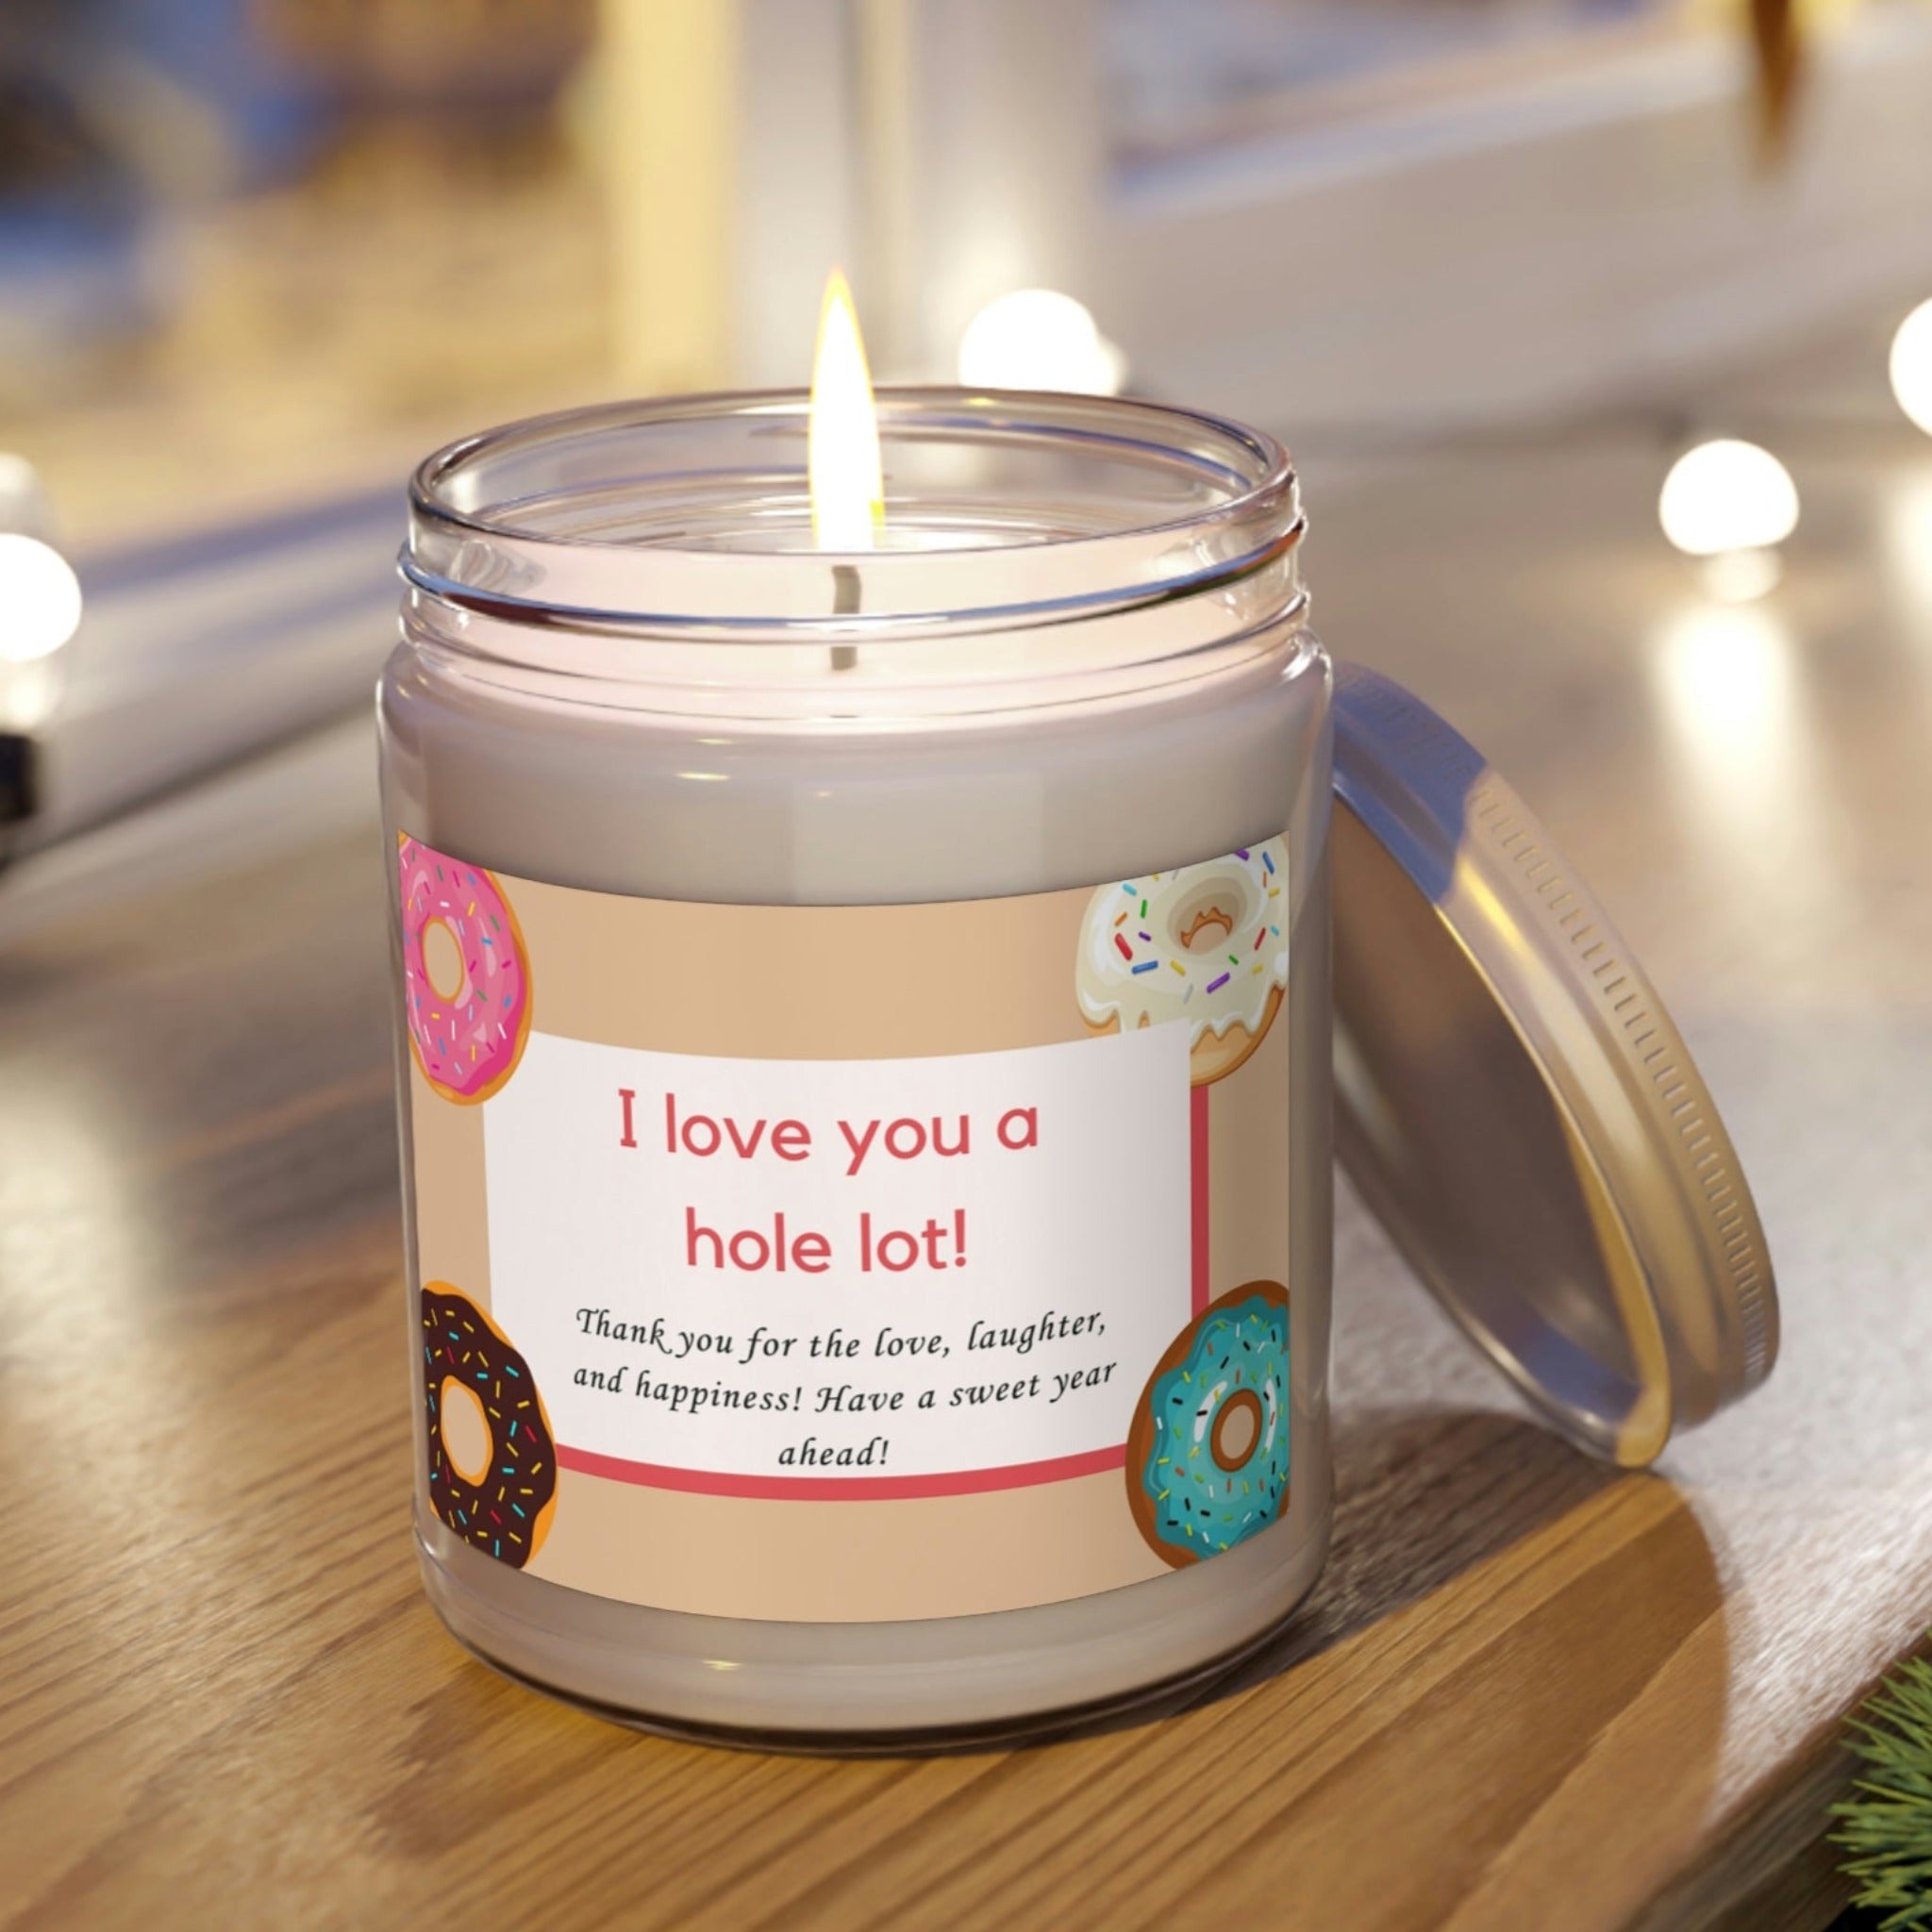 Donut Love Aromatherapy Scented Candle Eco Friendly . I love you a hole lot, Donut candle